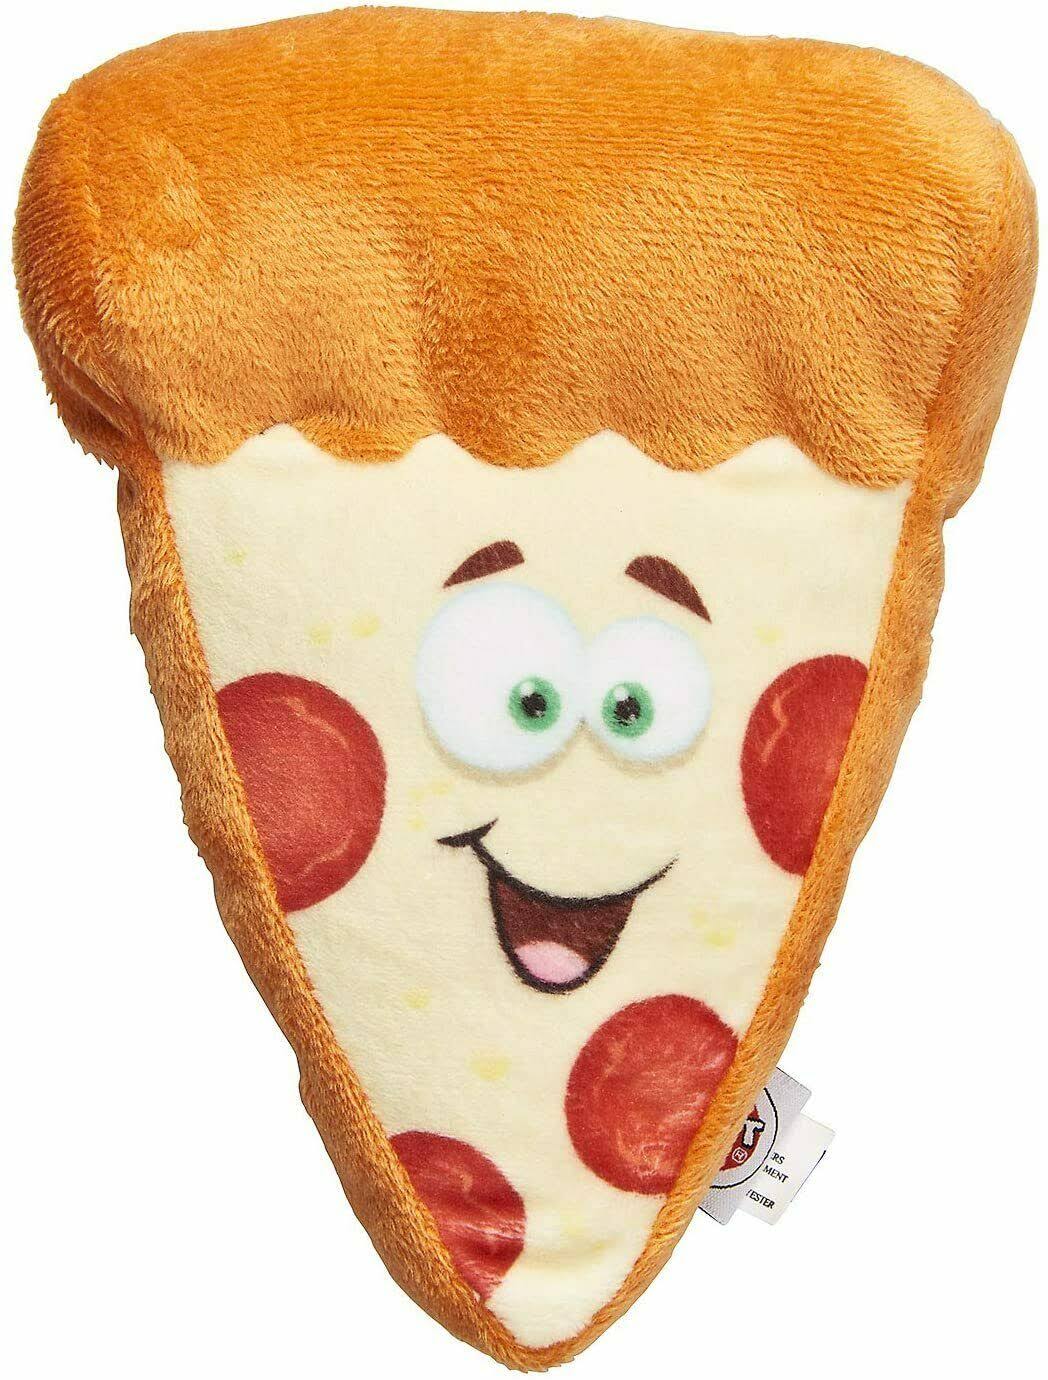 Spot Ethical Pepperoni Pizza Fun Face Food Dog Toy 6.5" with squeaker Soft Plush